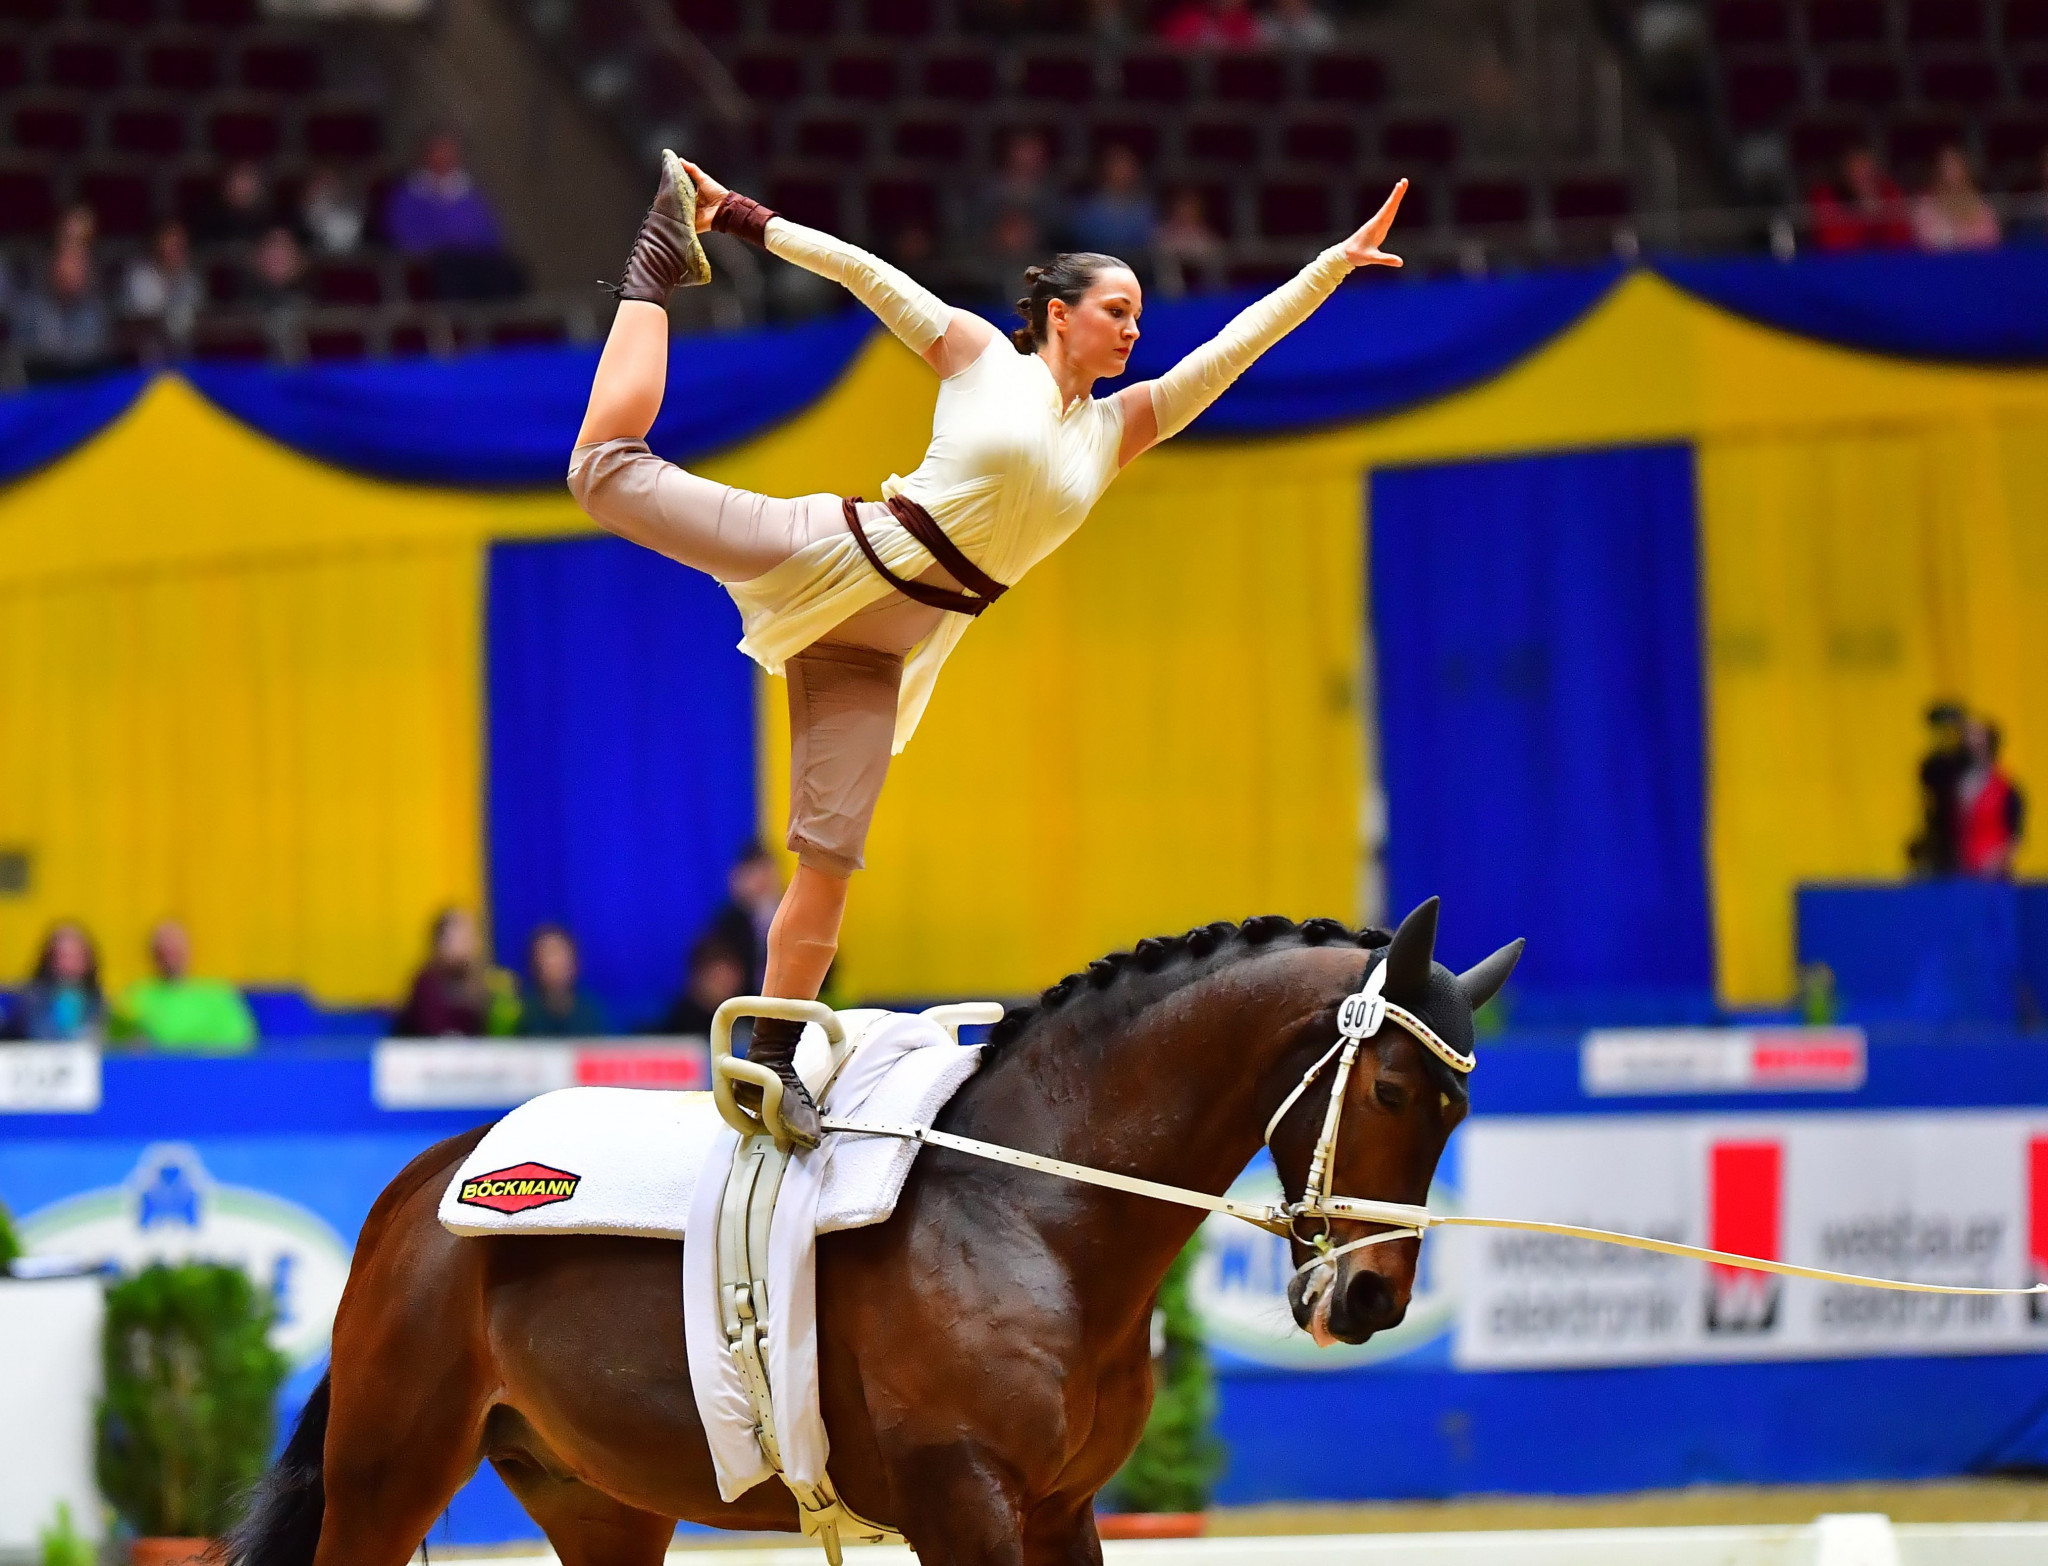 Boe secures first FEI World Cup Vaulting title as hosts Germany